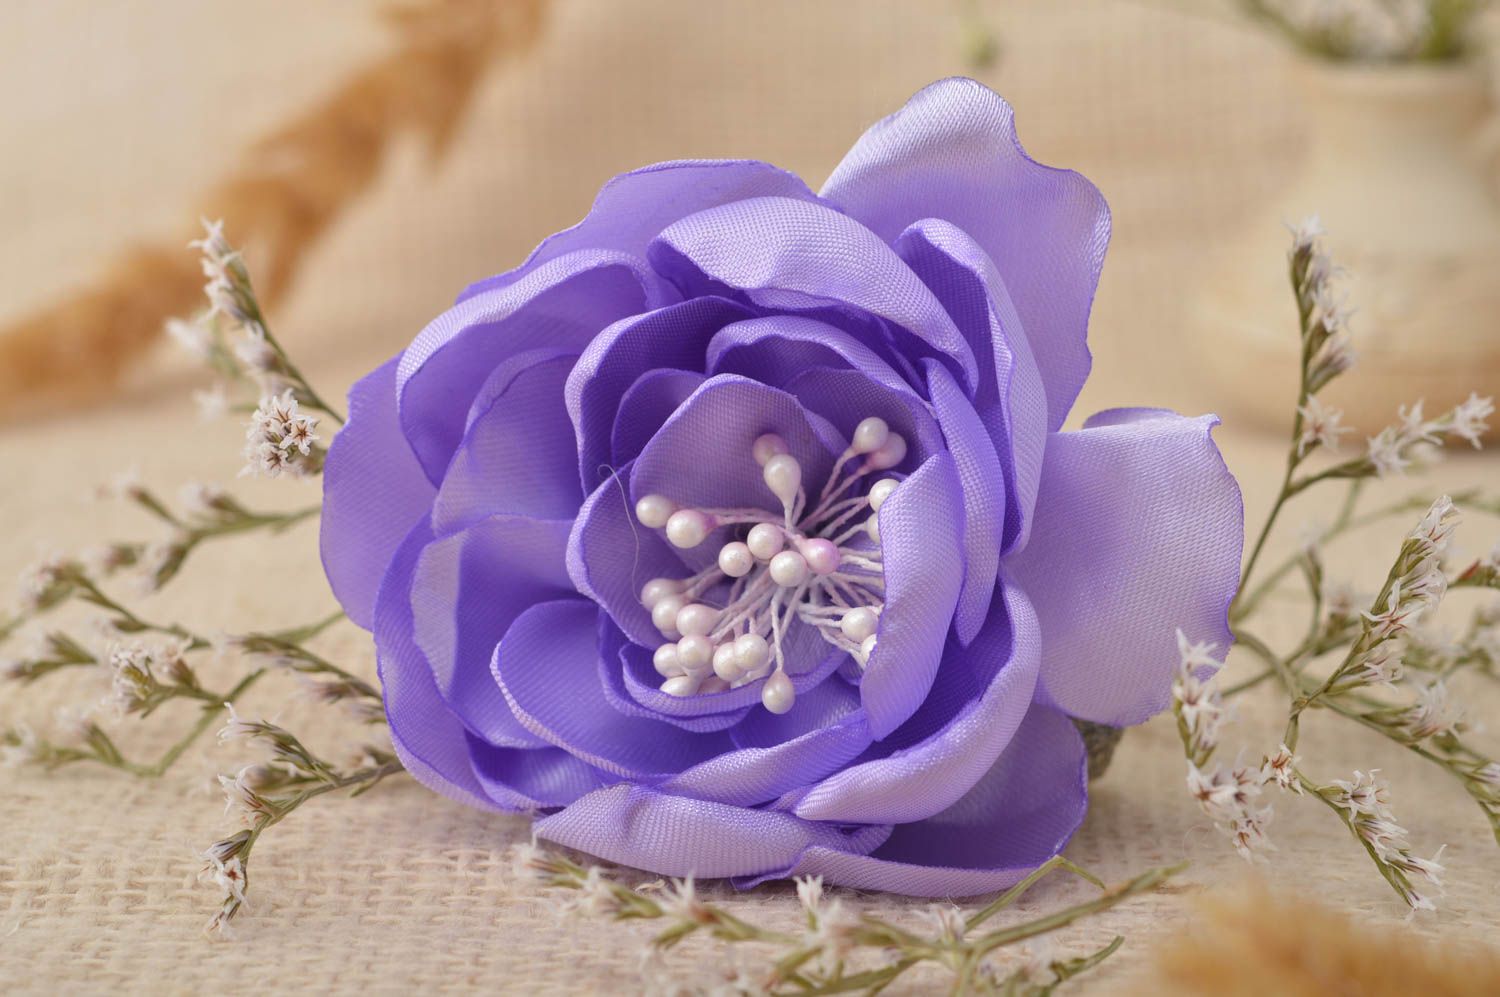 Beautiful handmade flower brooch homemade barrette hair clip gifts for her photo 1